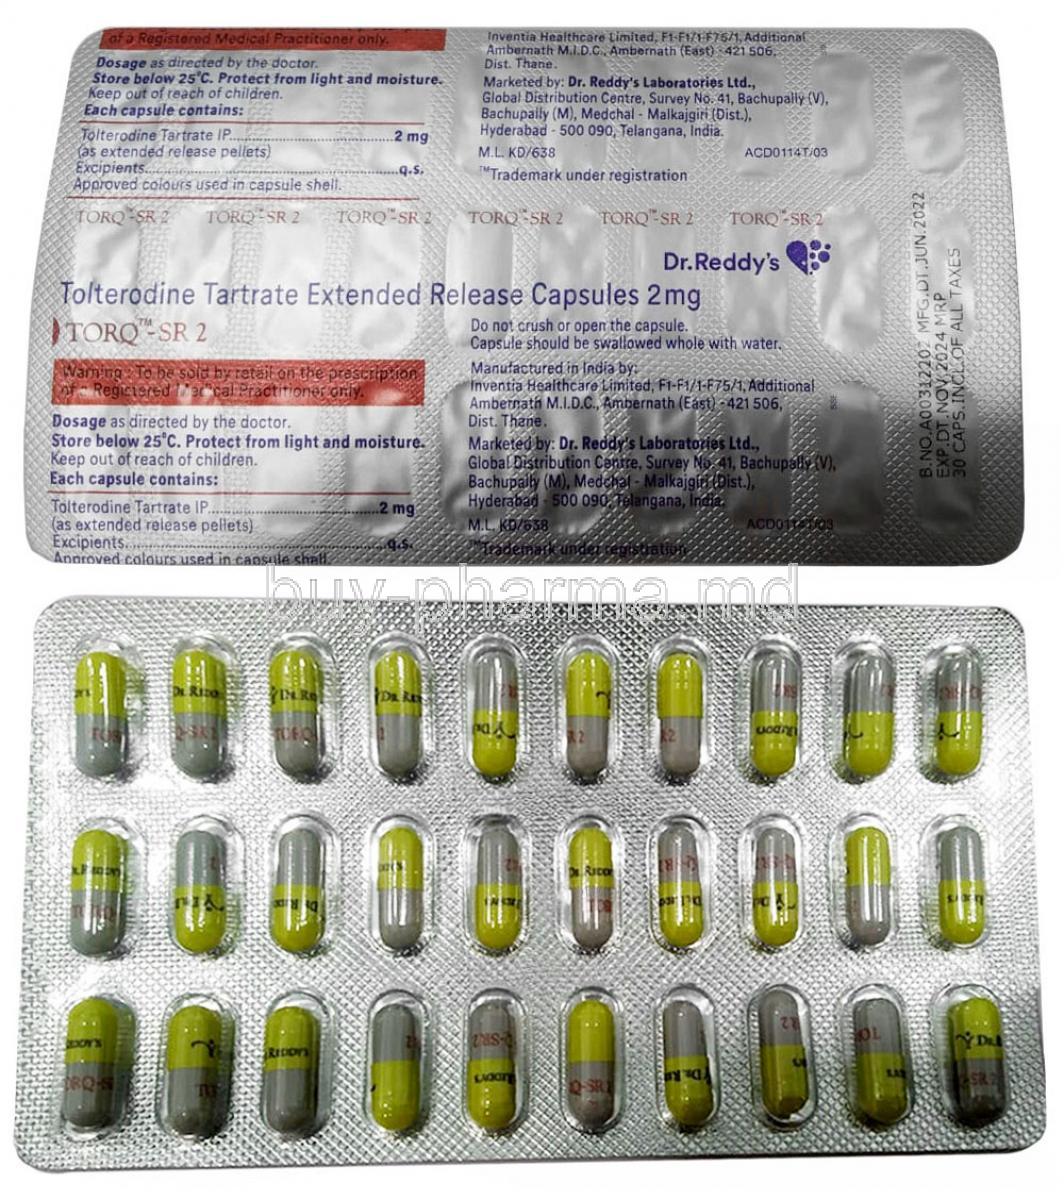 Torq-SR2, Tolterodine 2mg, 30capsules, Inventia Healthcare Pvt Ltd (Dr Reddy's), Blisterpack front and back view